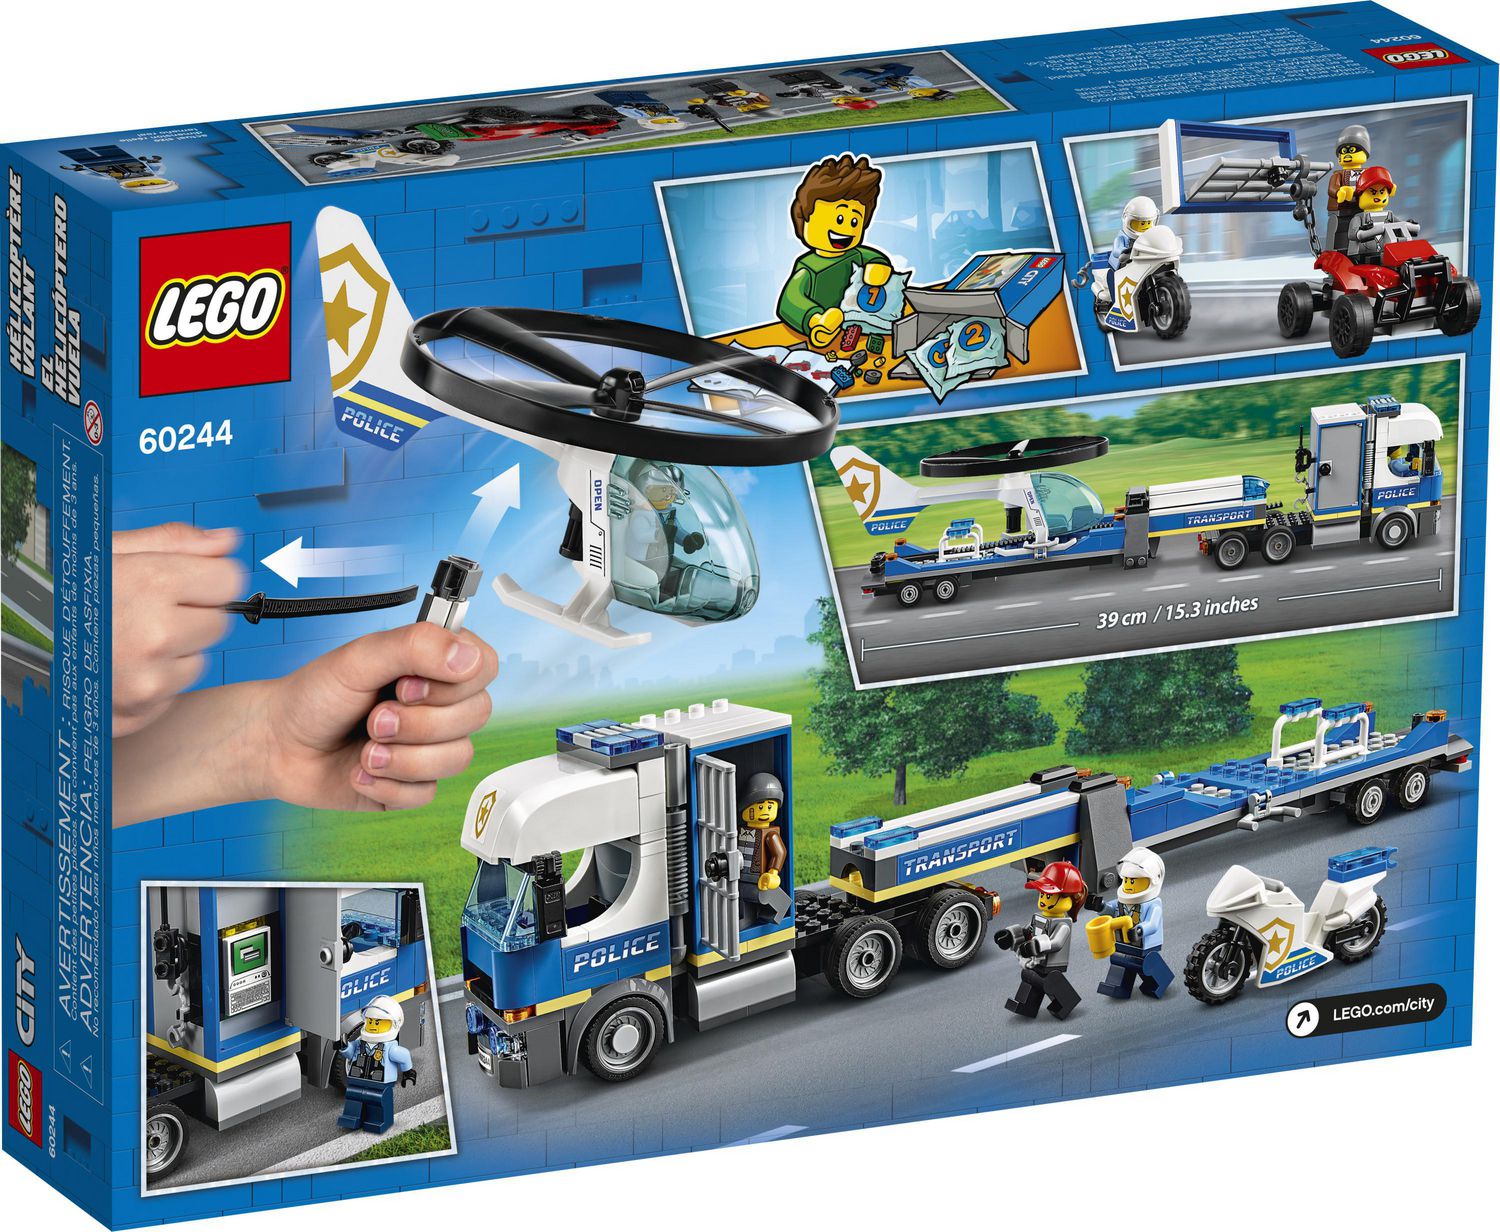 LEGO City Police Helicopter Transport 60244 Toy Building Kit (317